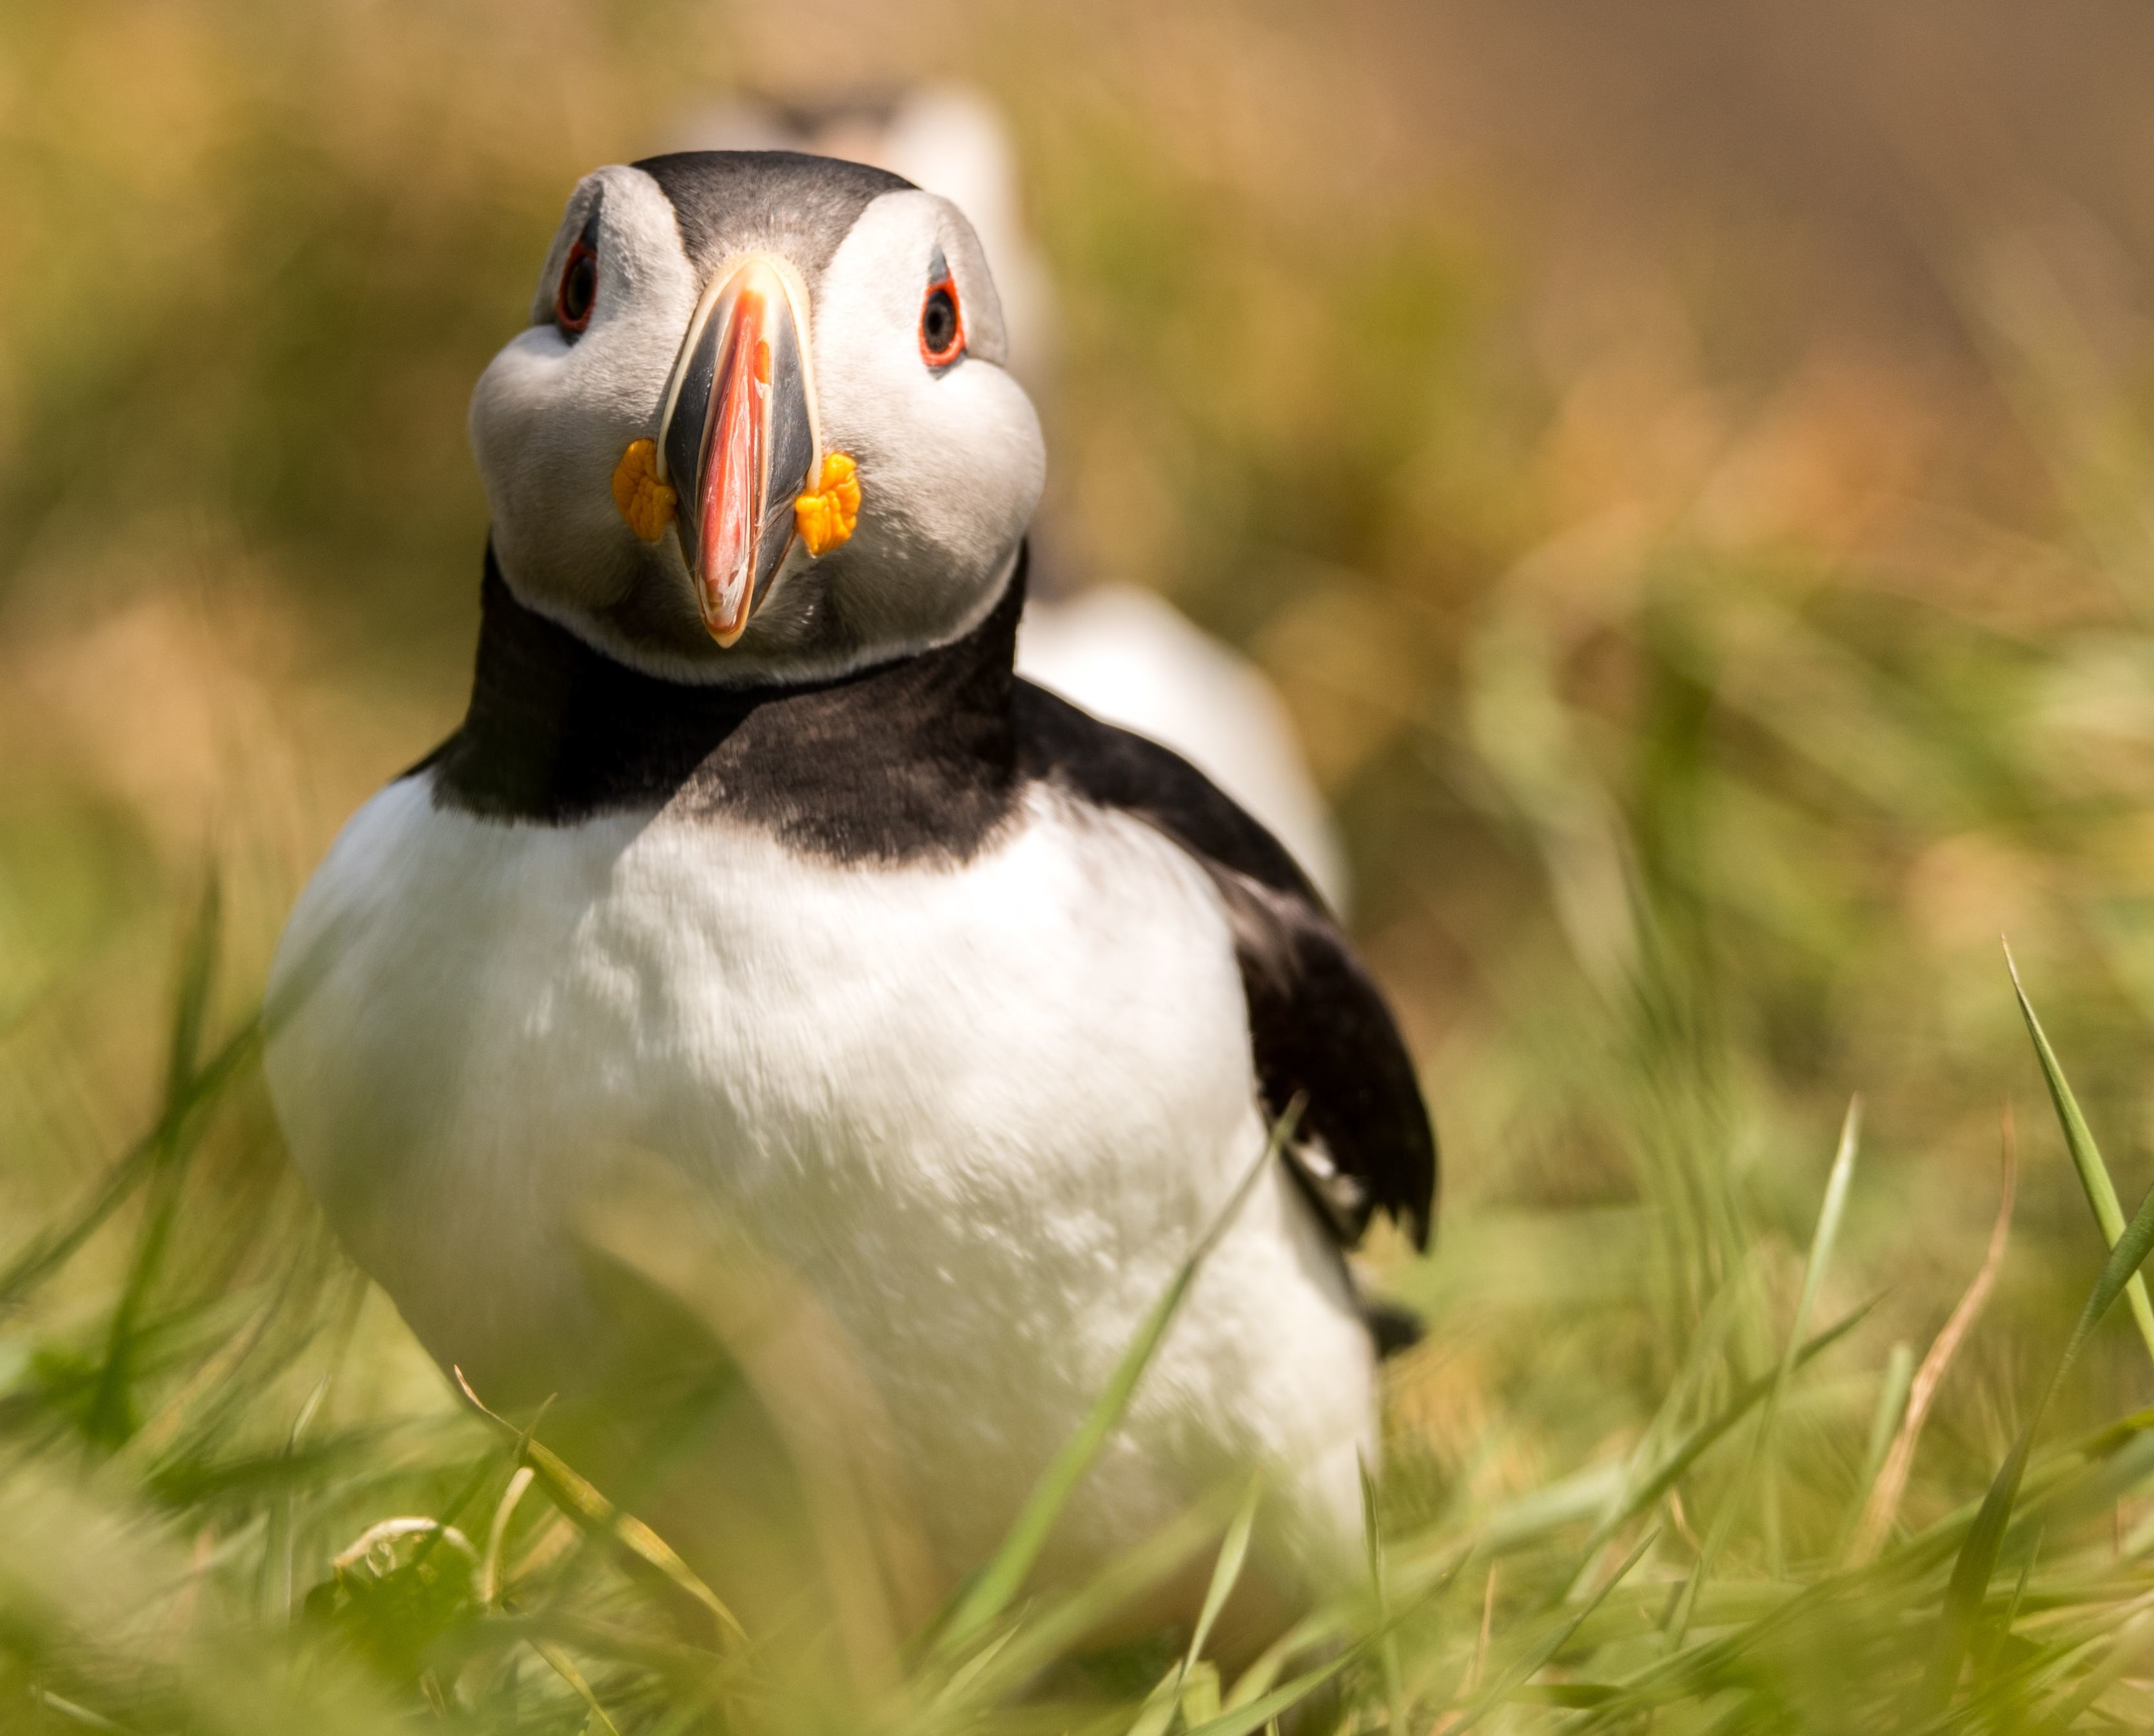 Orkney Islands Stickers - The Incredibly Adorable Puffin!